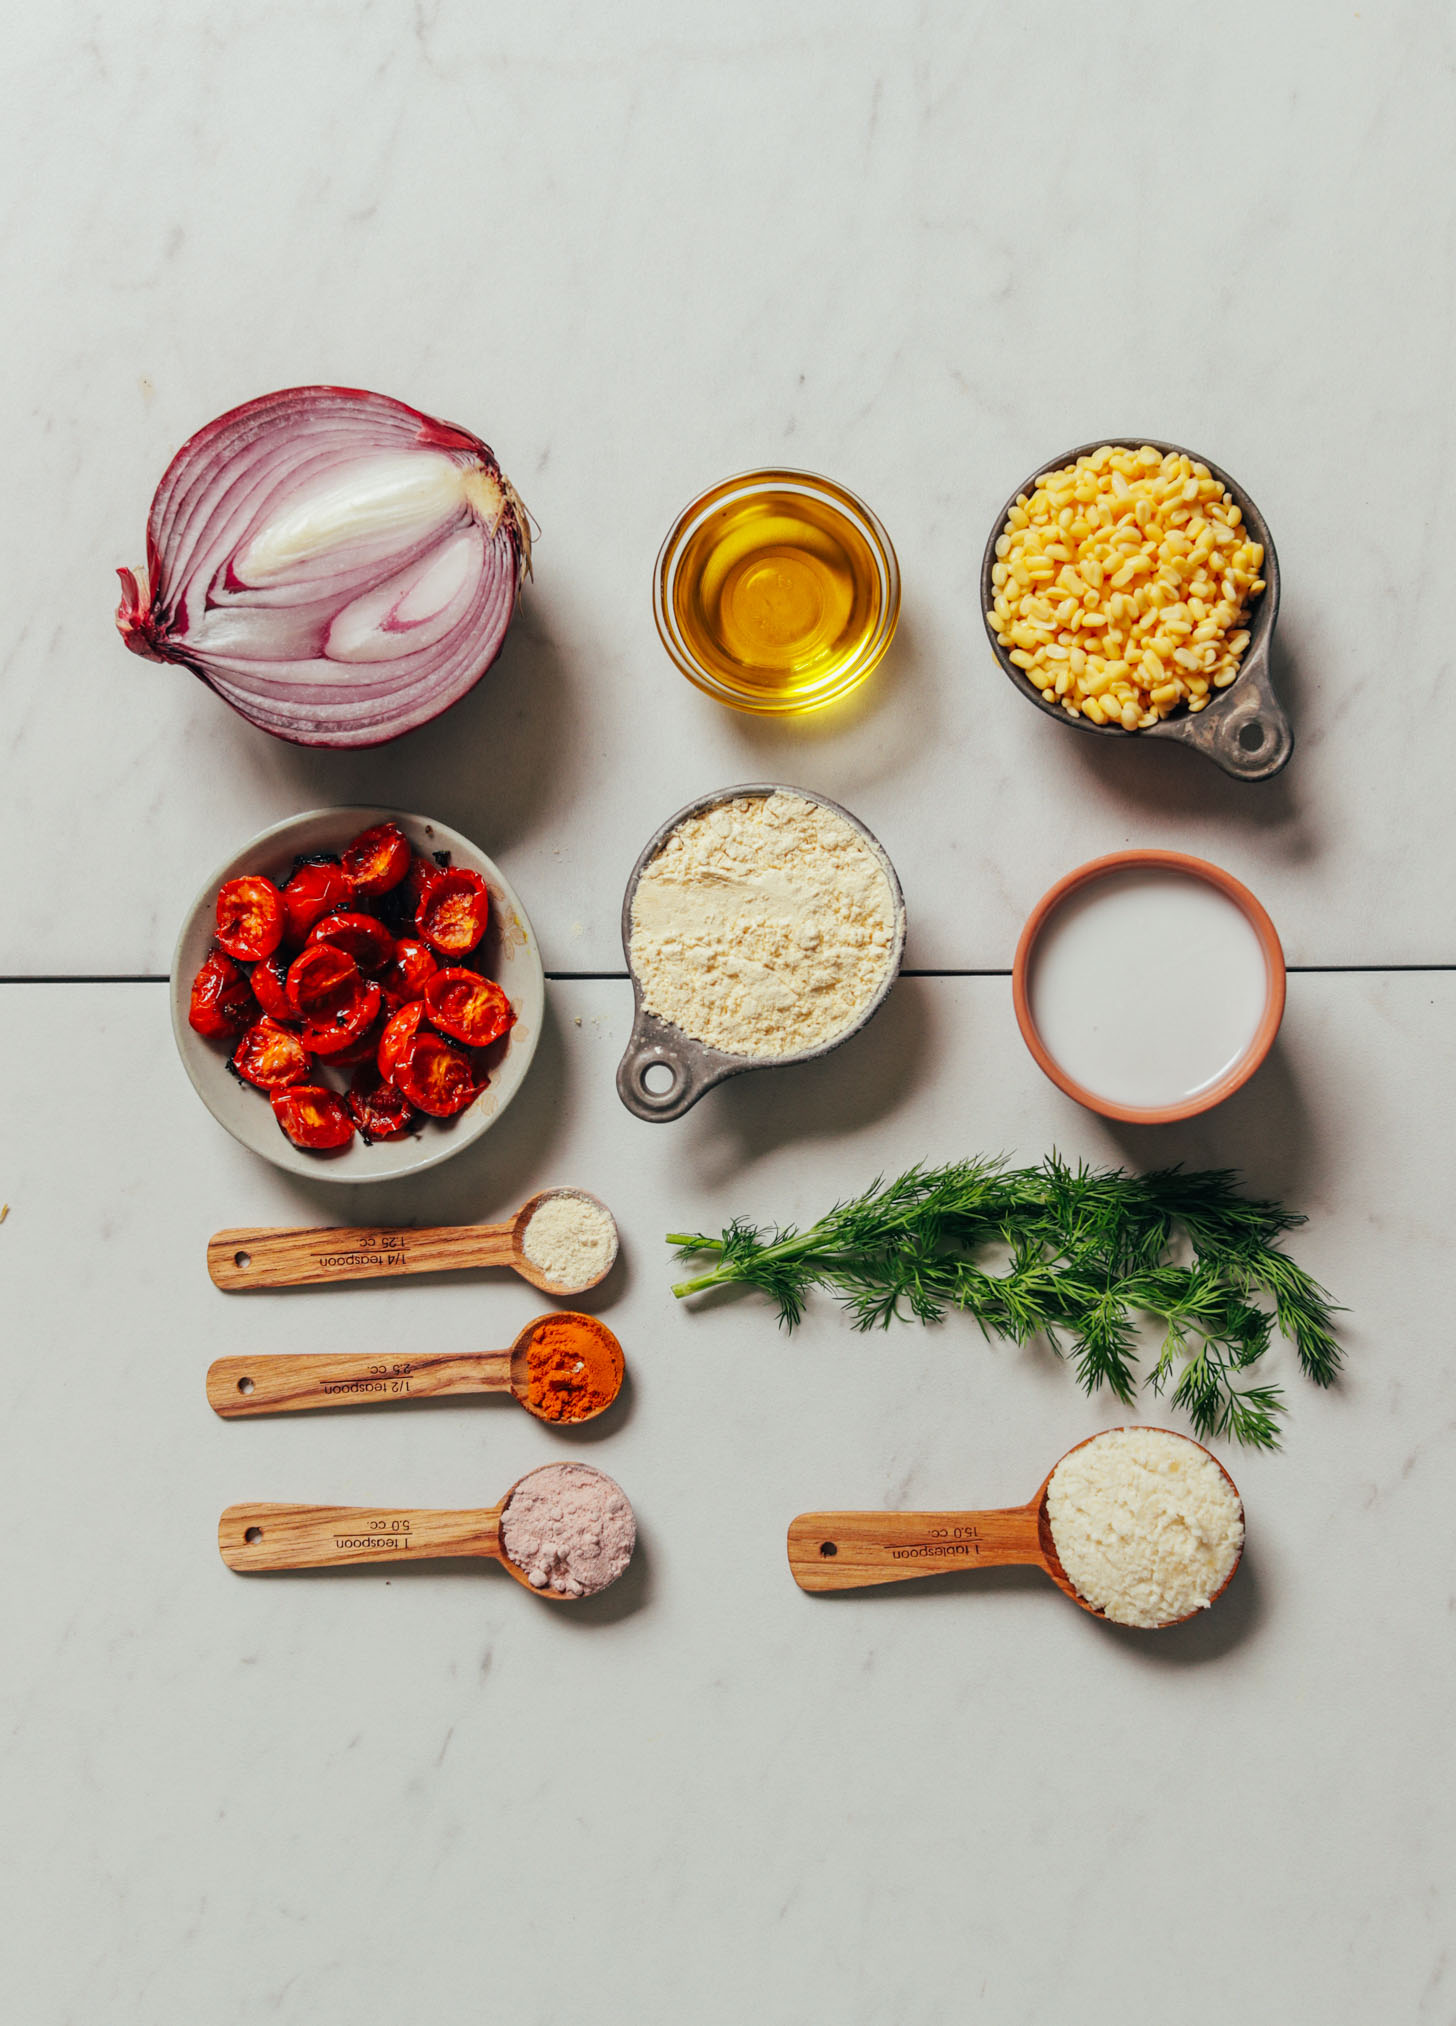 Display of ingredients for making protein-rich Vegan Frittata